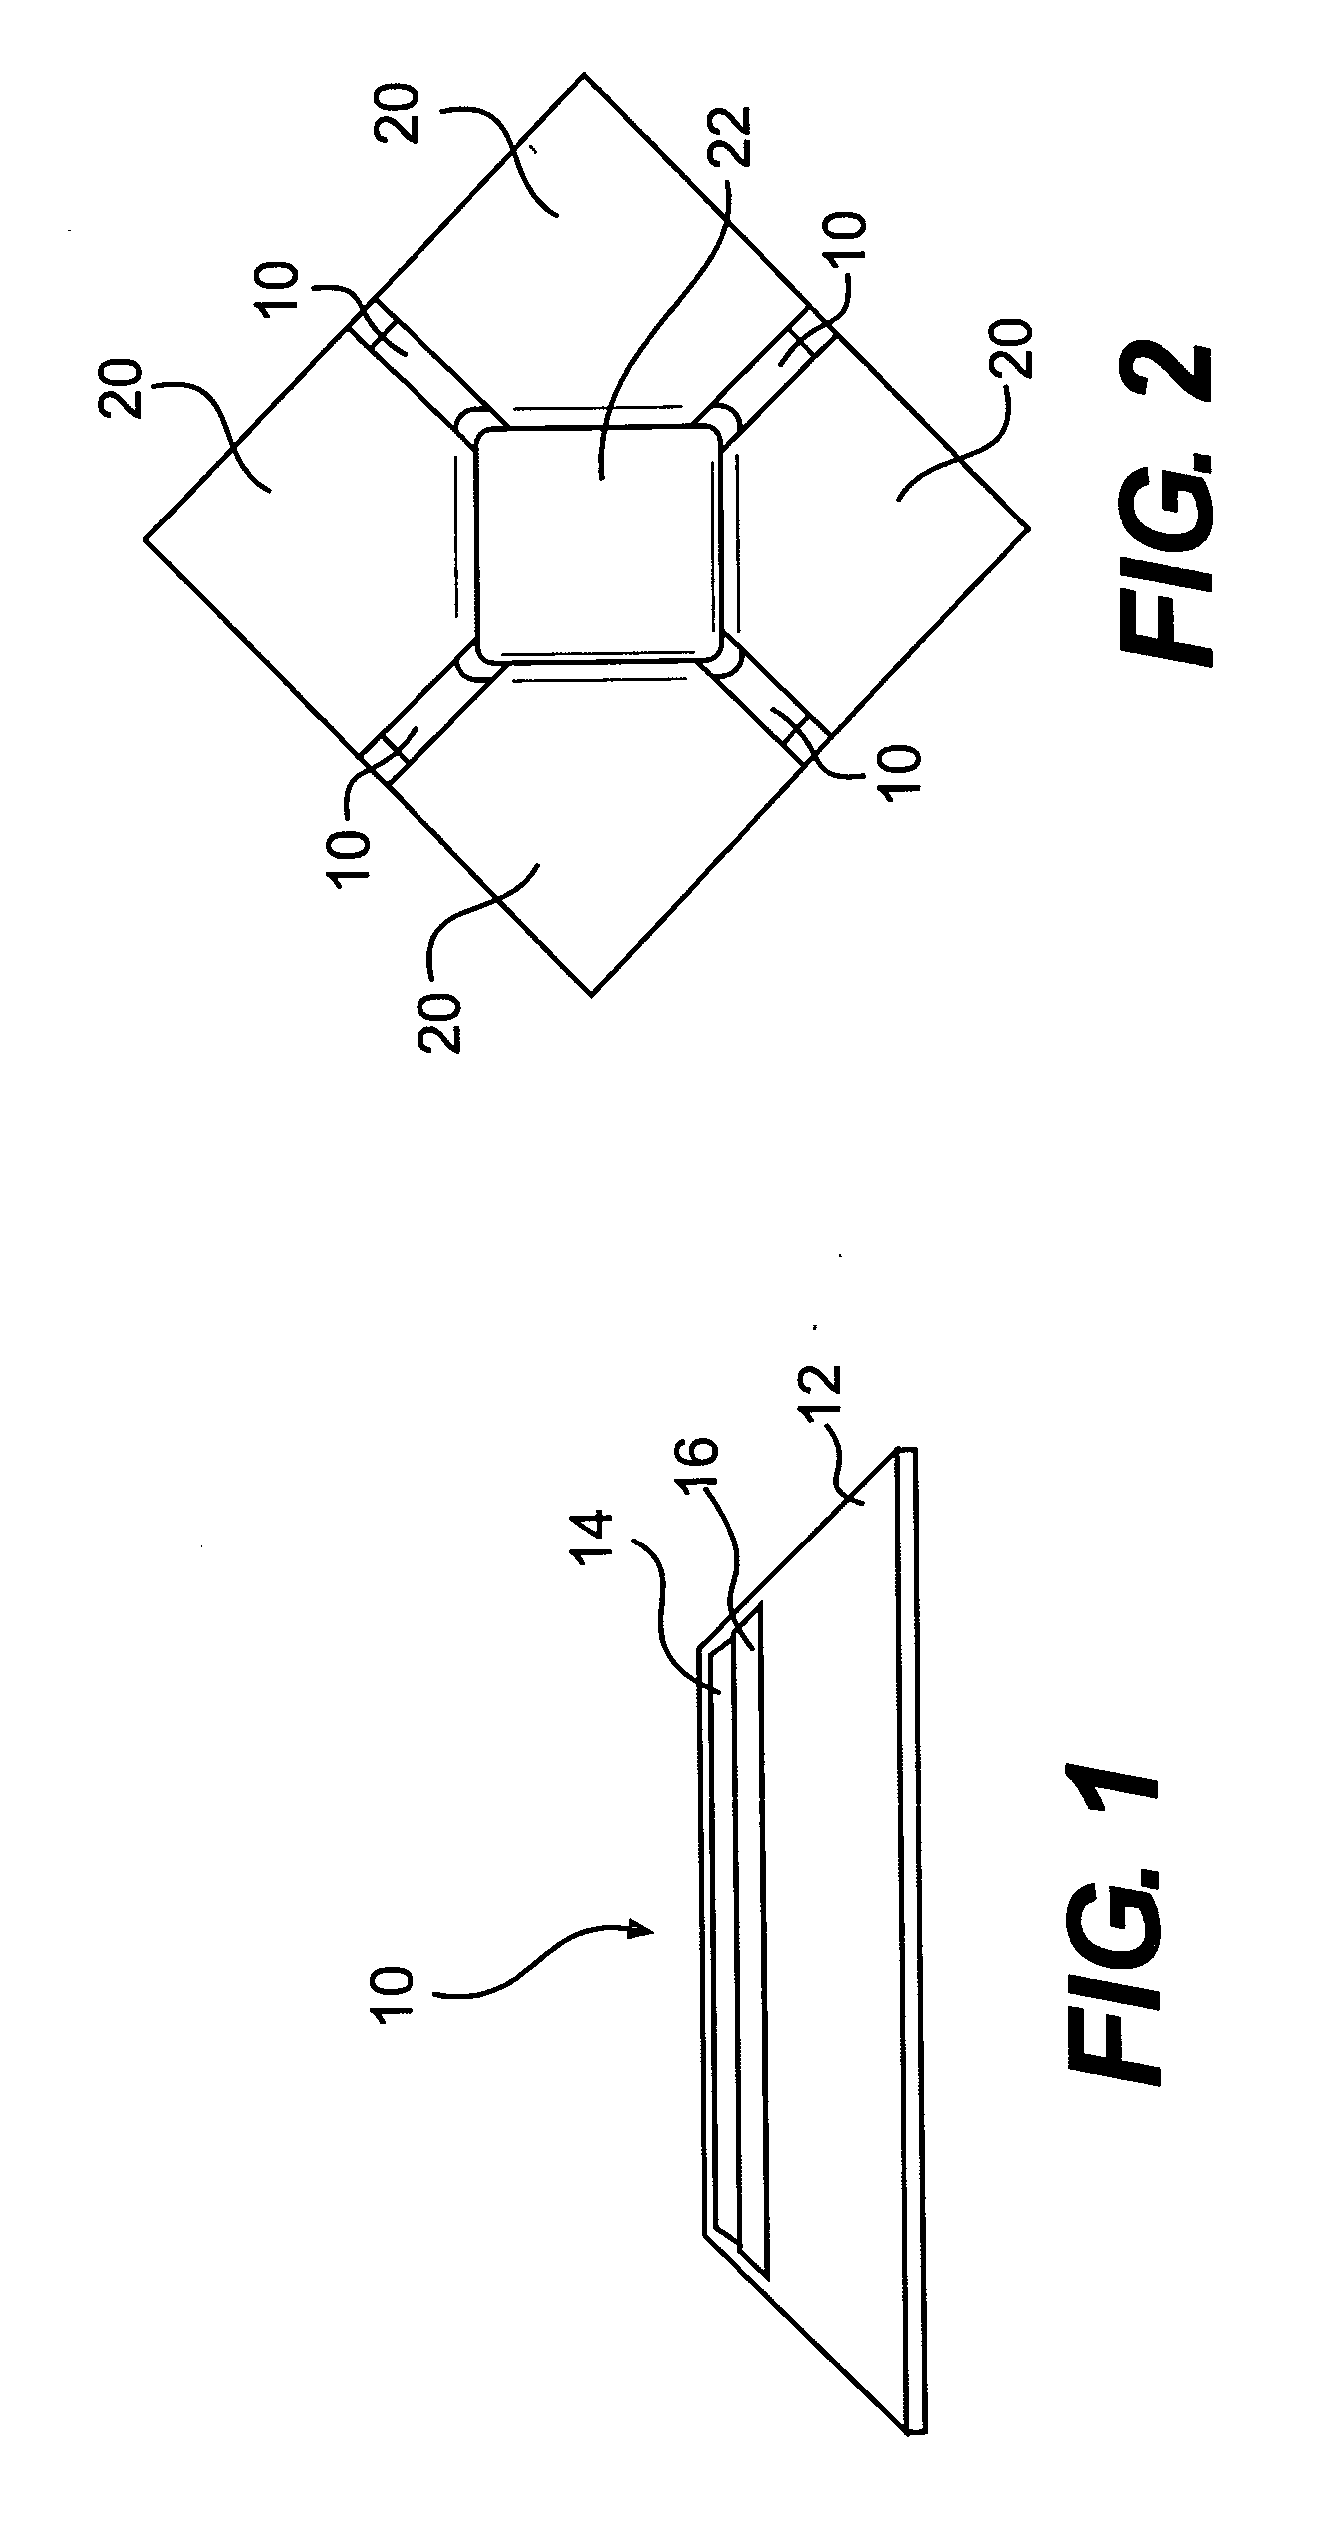 Gasket material for use in high pressure, high temperature apparatus